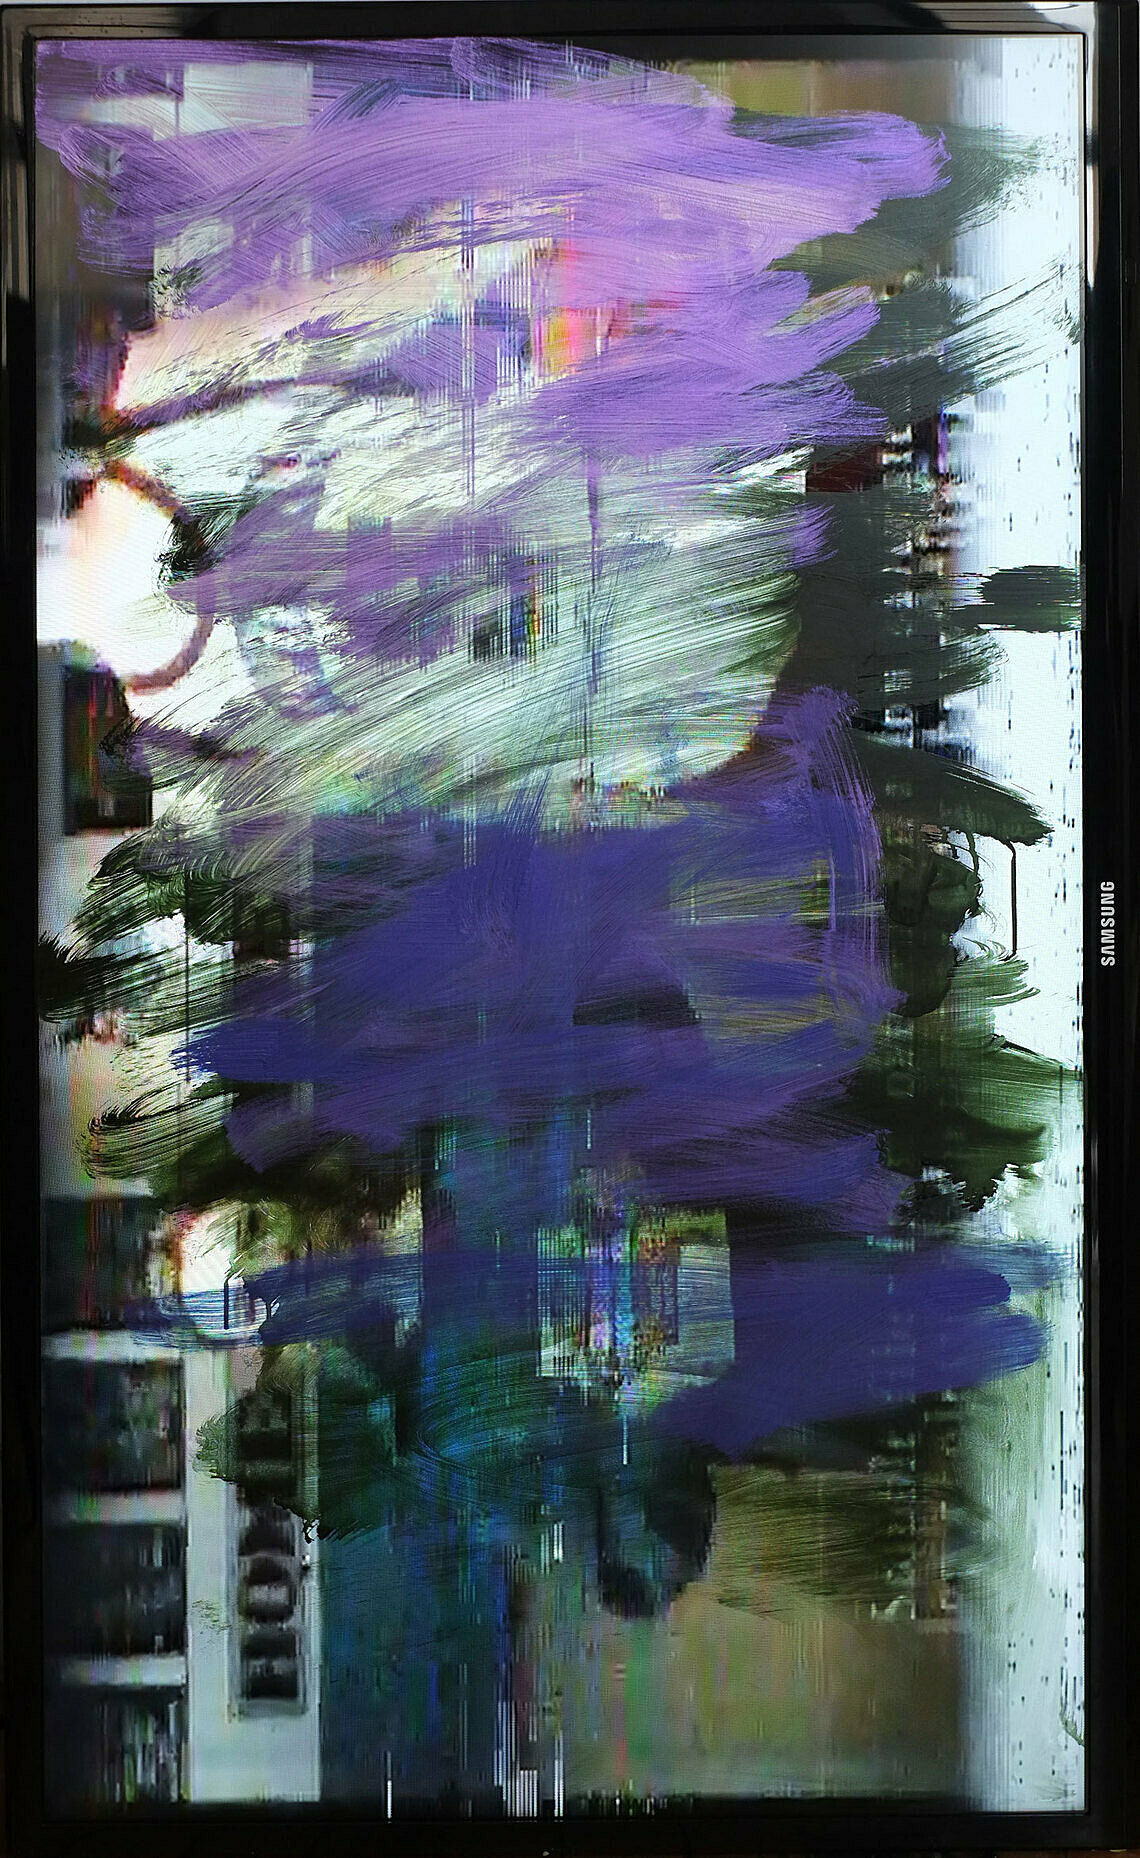 A painting with broad brushstrokes over a screen.